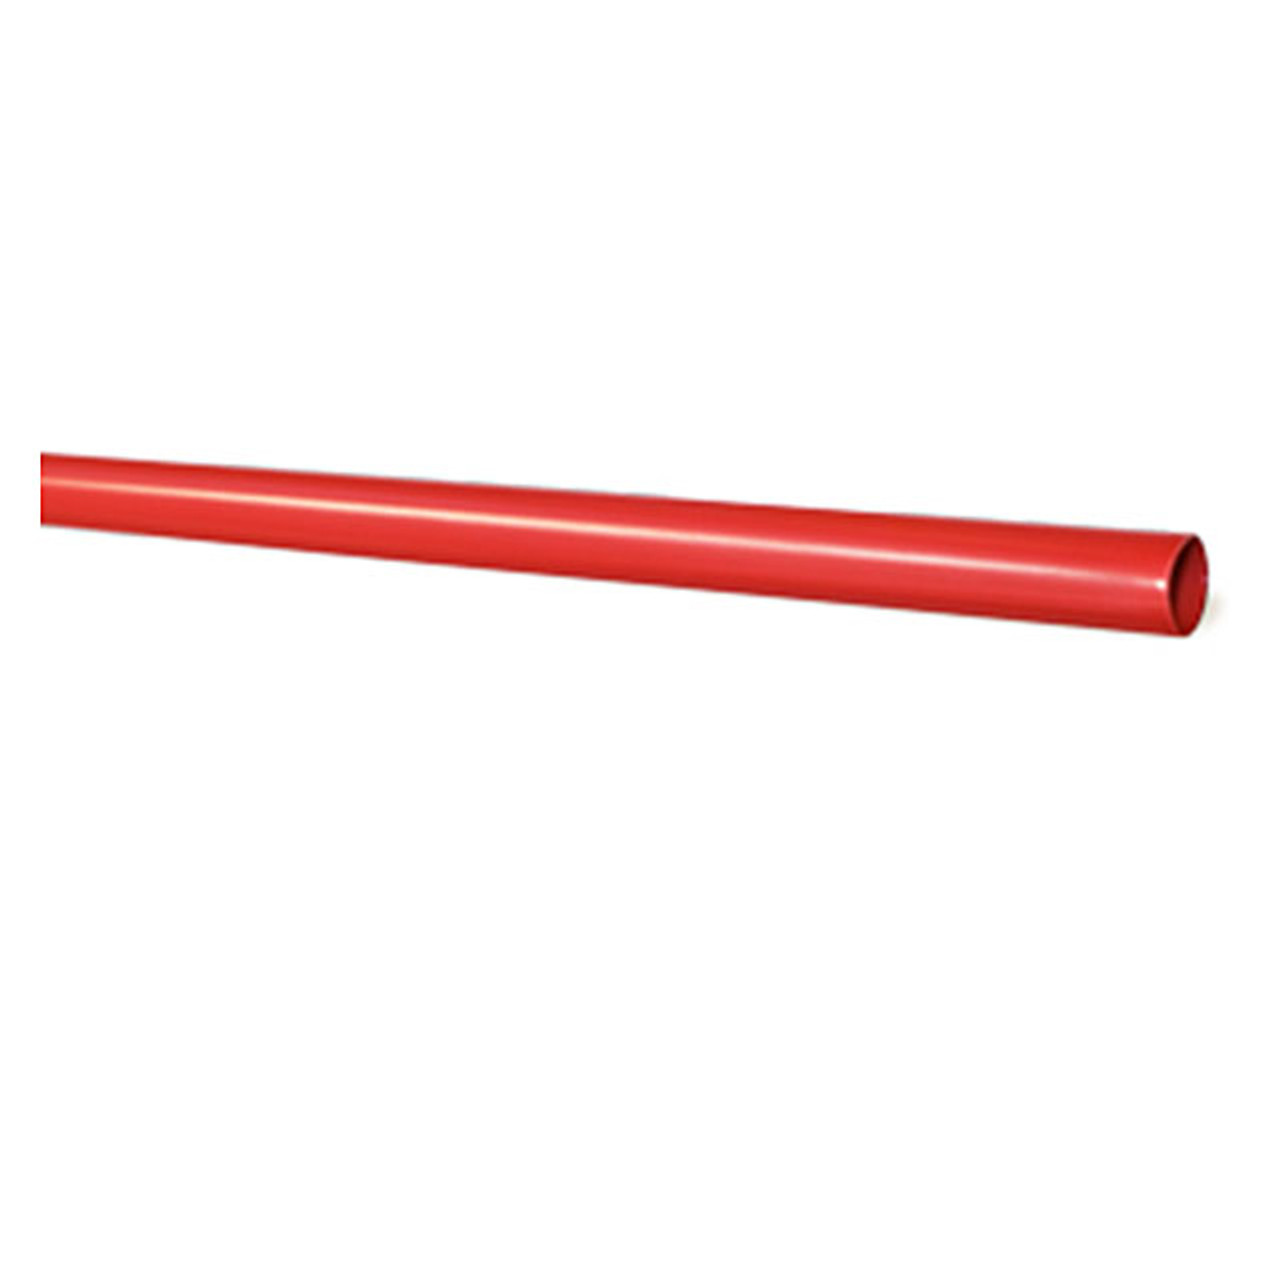 HEAT SHRINK 1/2" RED 4' ADHESIVE LINED DUAL WALL